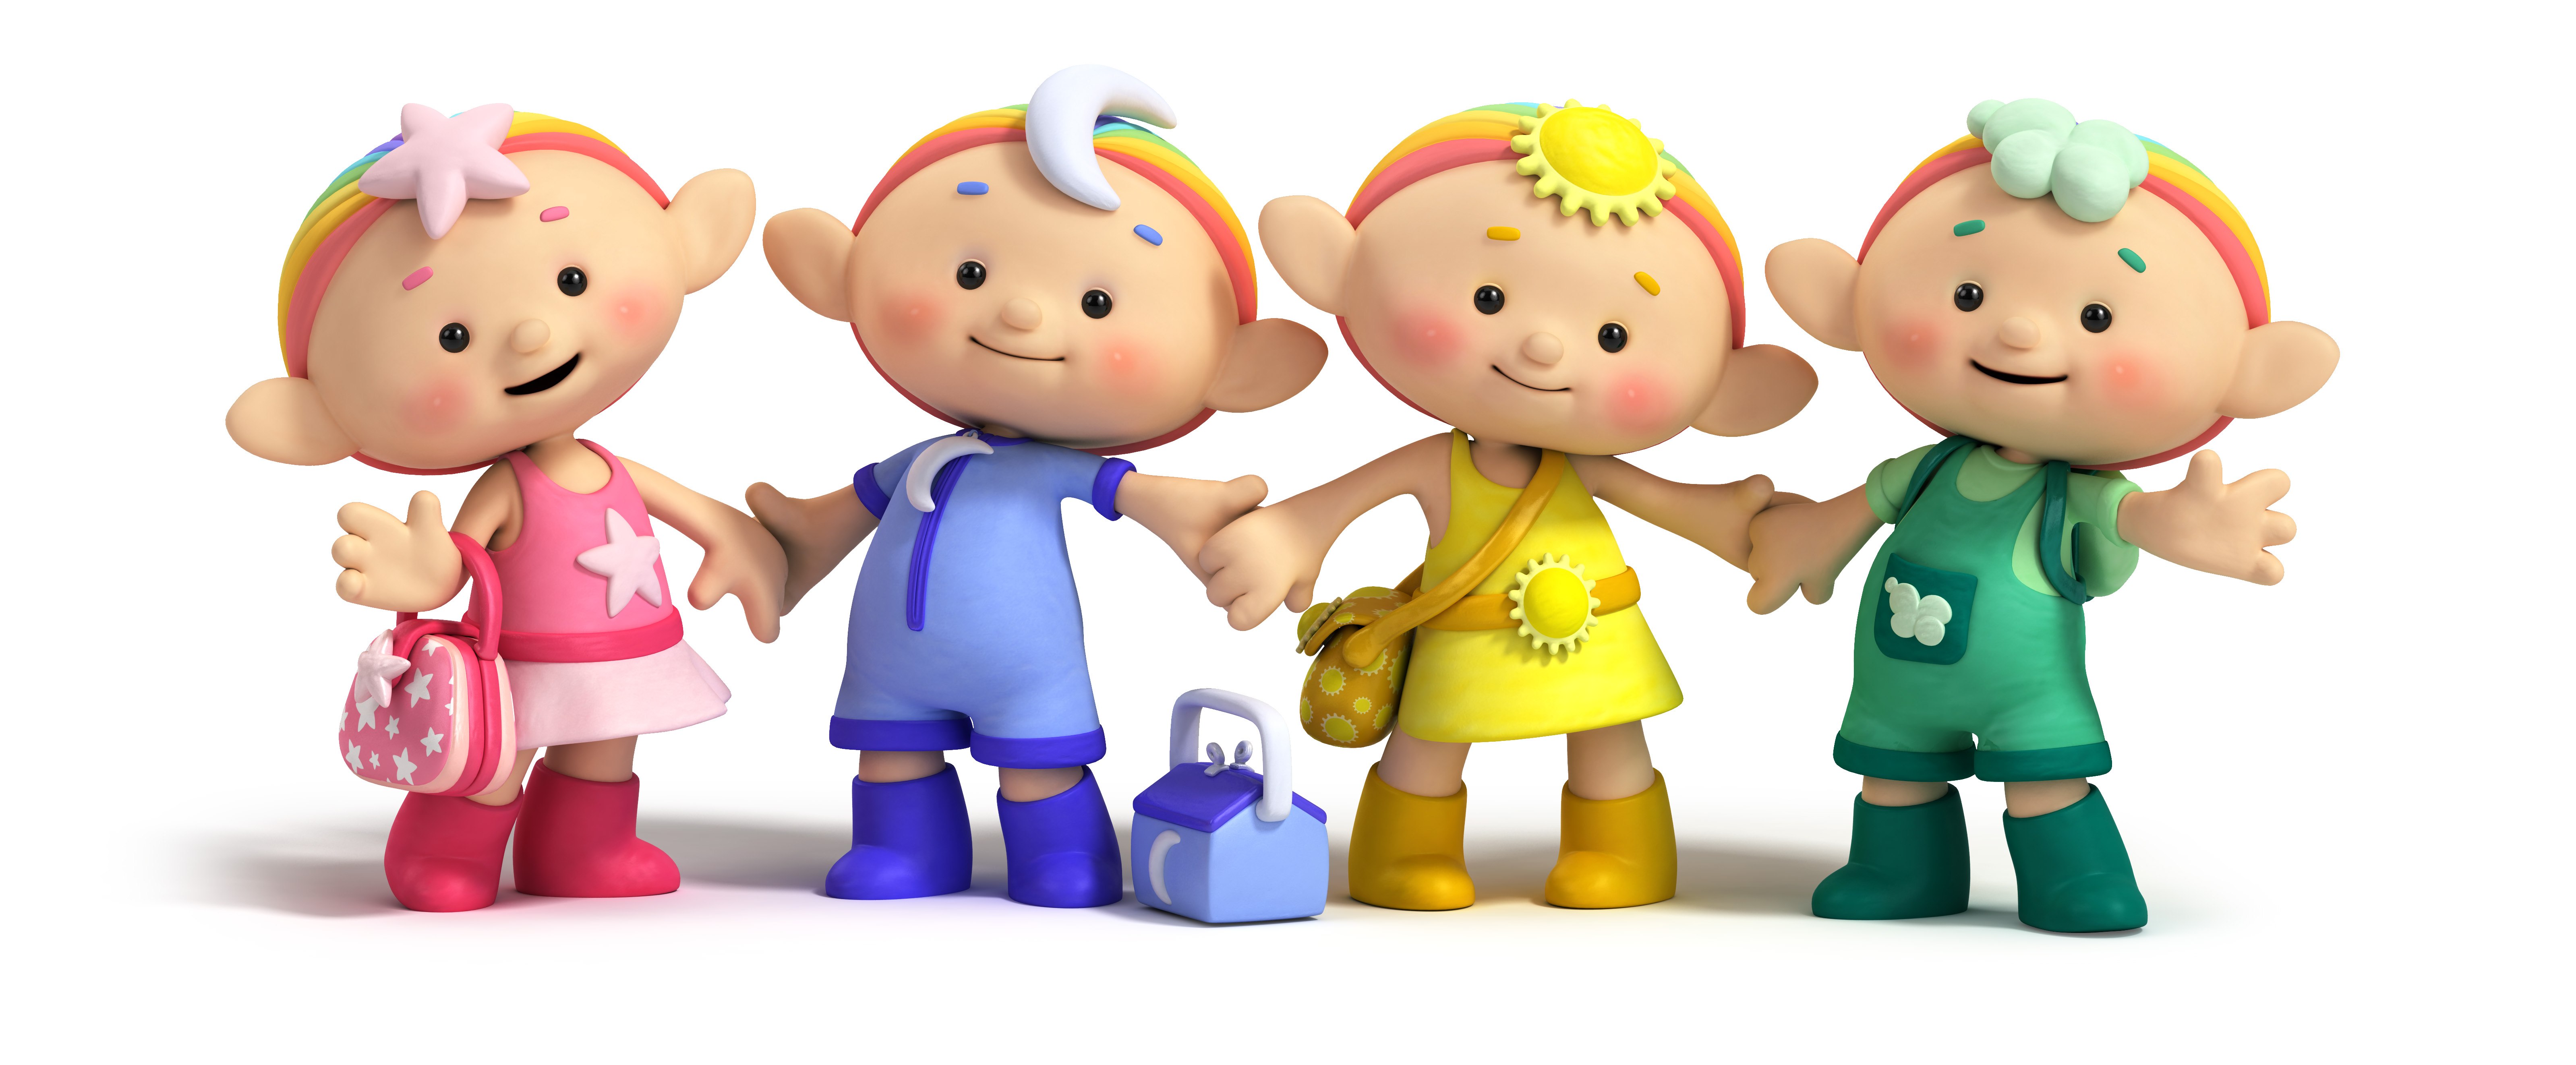 A Raft Of New Overseas S For Its Flourishing Pre School Property Cloudbabies Which Sees The 52 X 10 Cg Animated Series Licensed To Rtp In Portugal